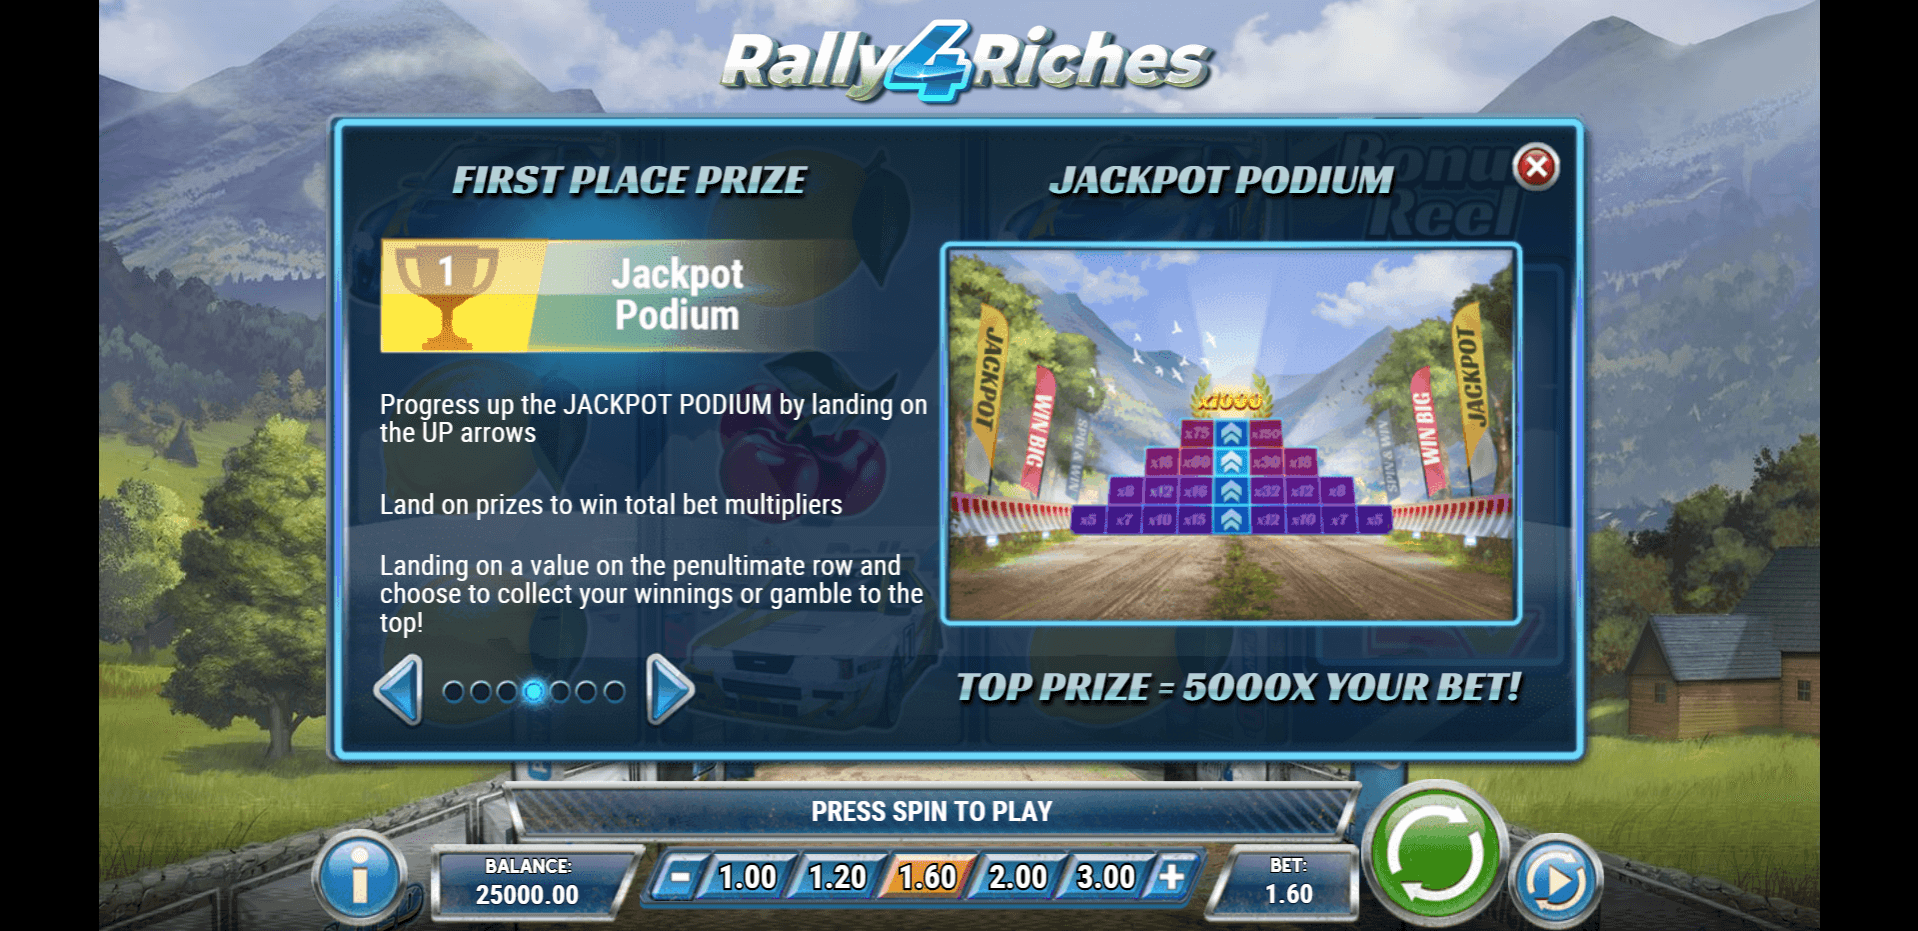 rally 4 riches slot machine detail image 3